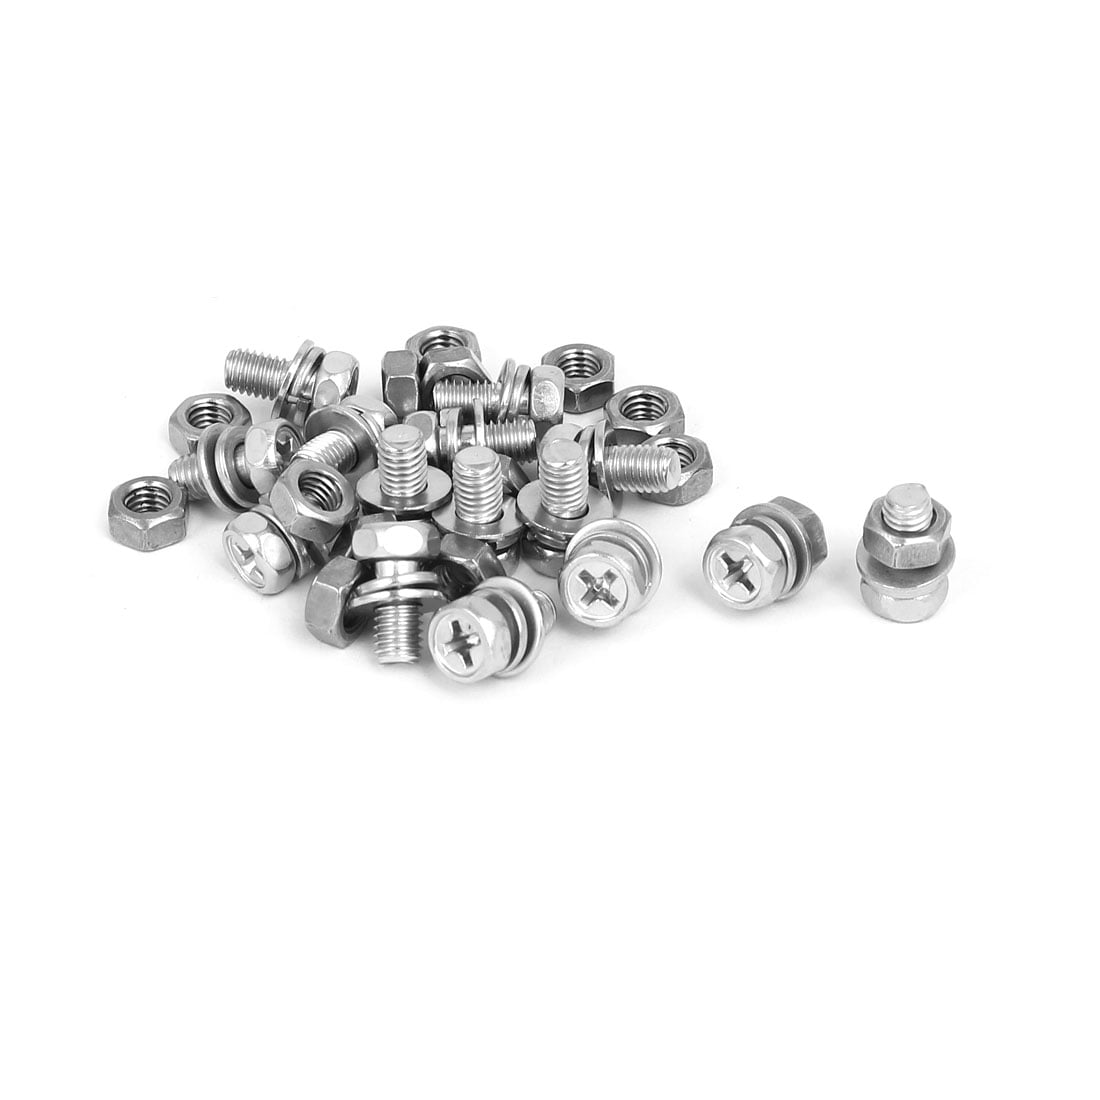 M5 x 10mm 304 Stainless Steel Hex Head Bolts Nuts w Washers 15 Sets 